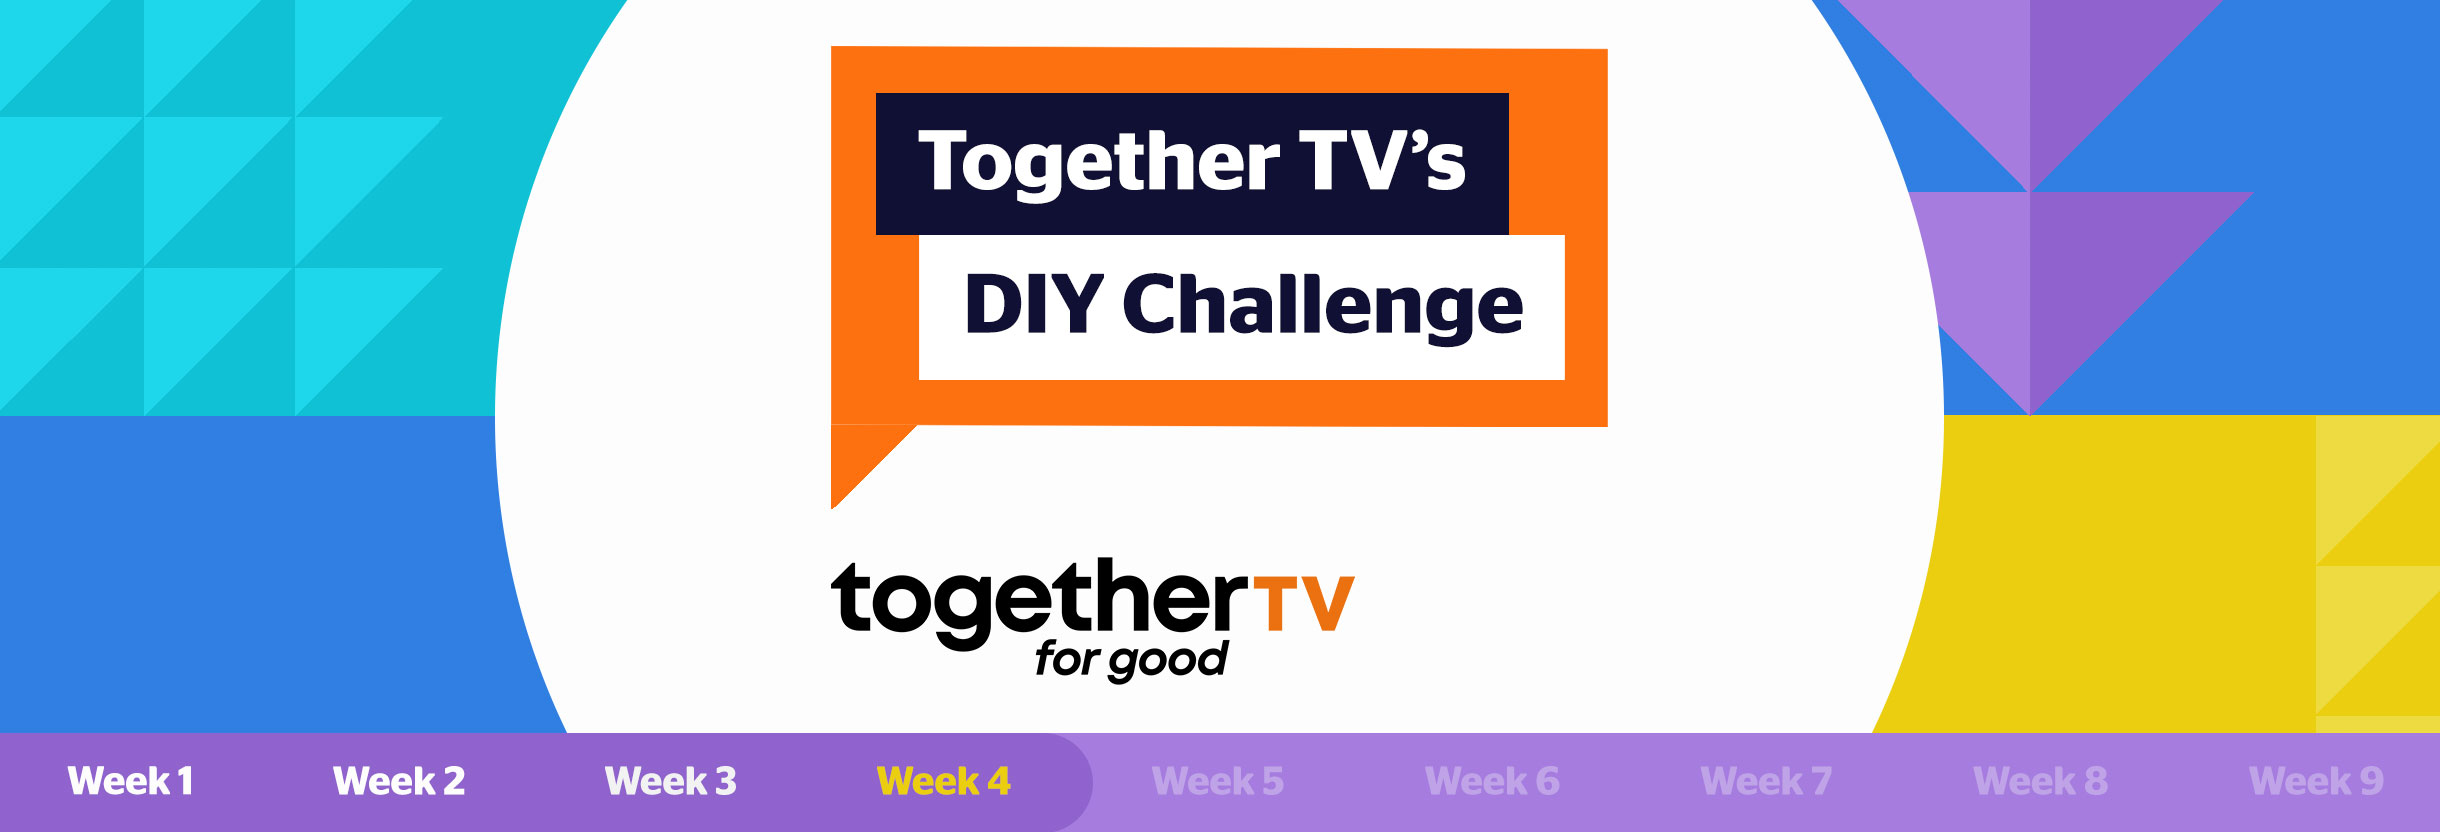 Welcome to Week 4 of the DIY Challenge